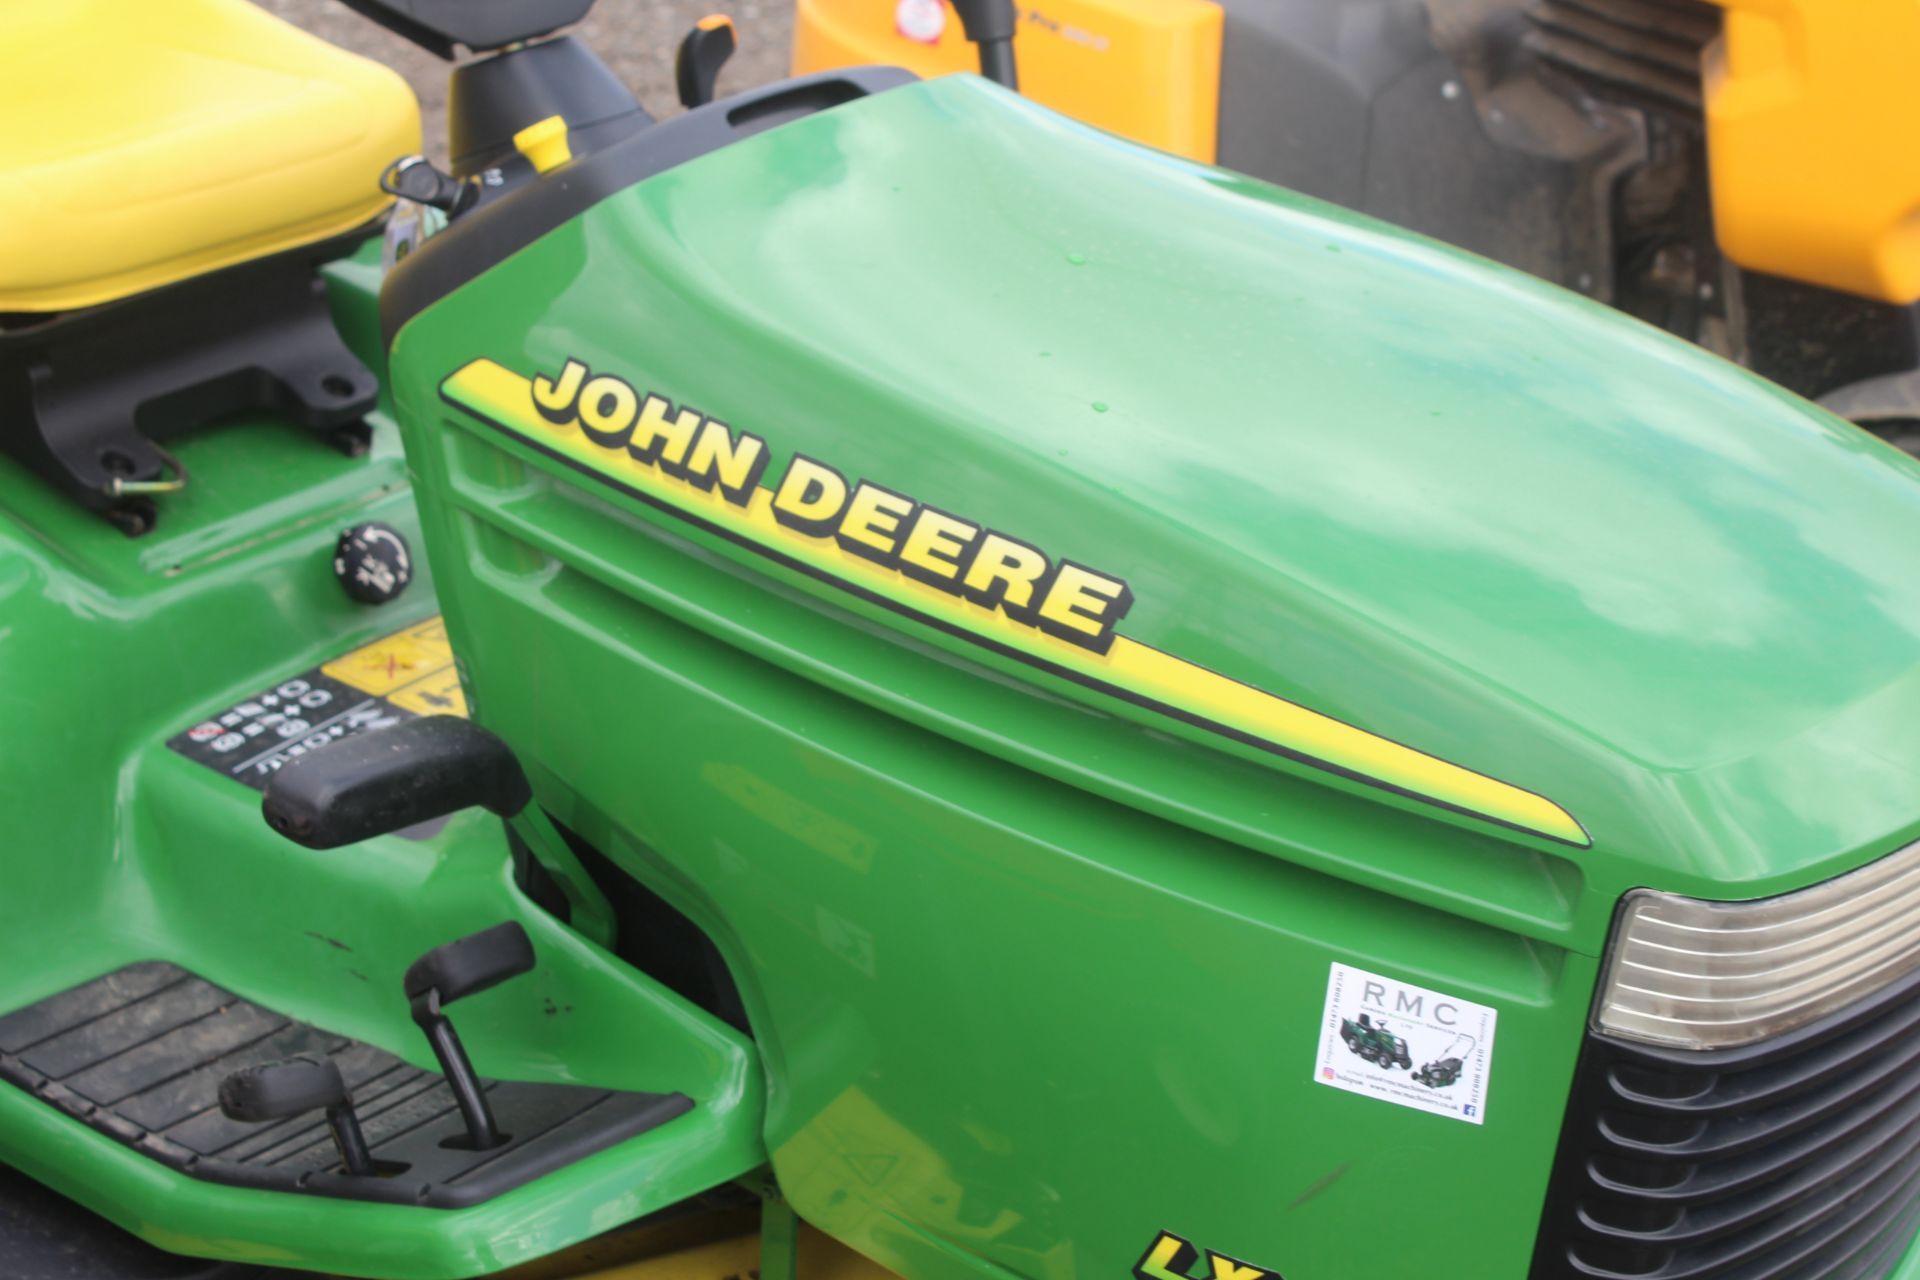 John Deere LX279 lawn mower with collector. Owned from new. Key held. - Image 10 of 30